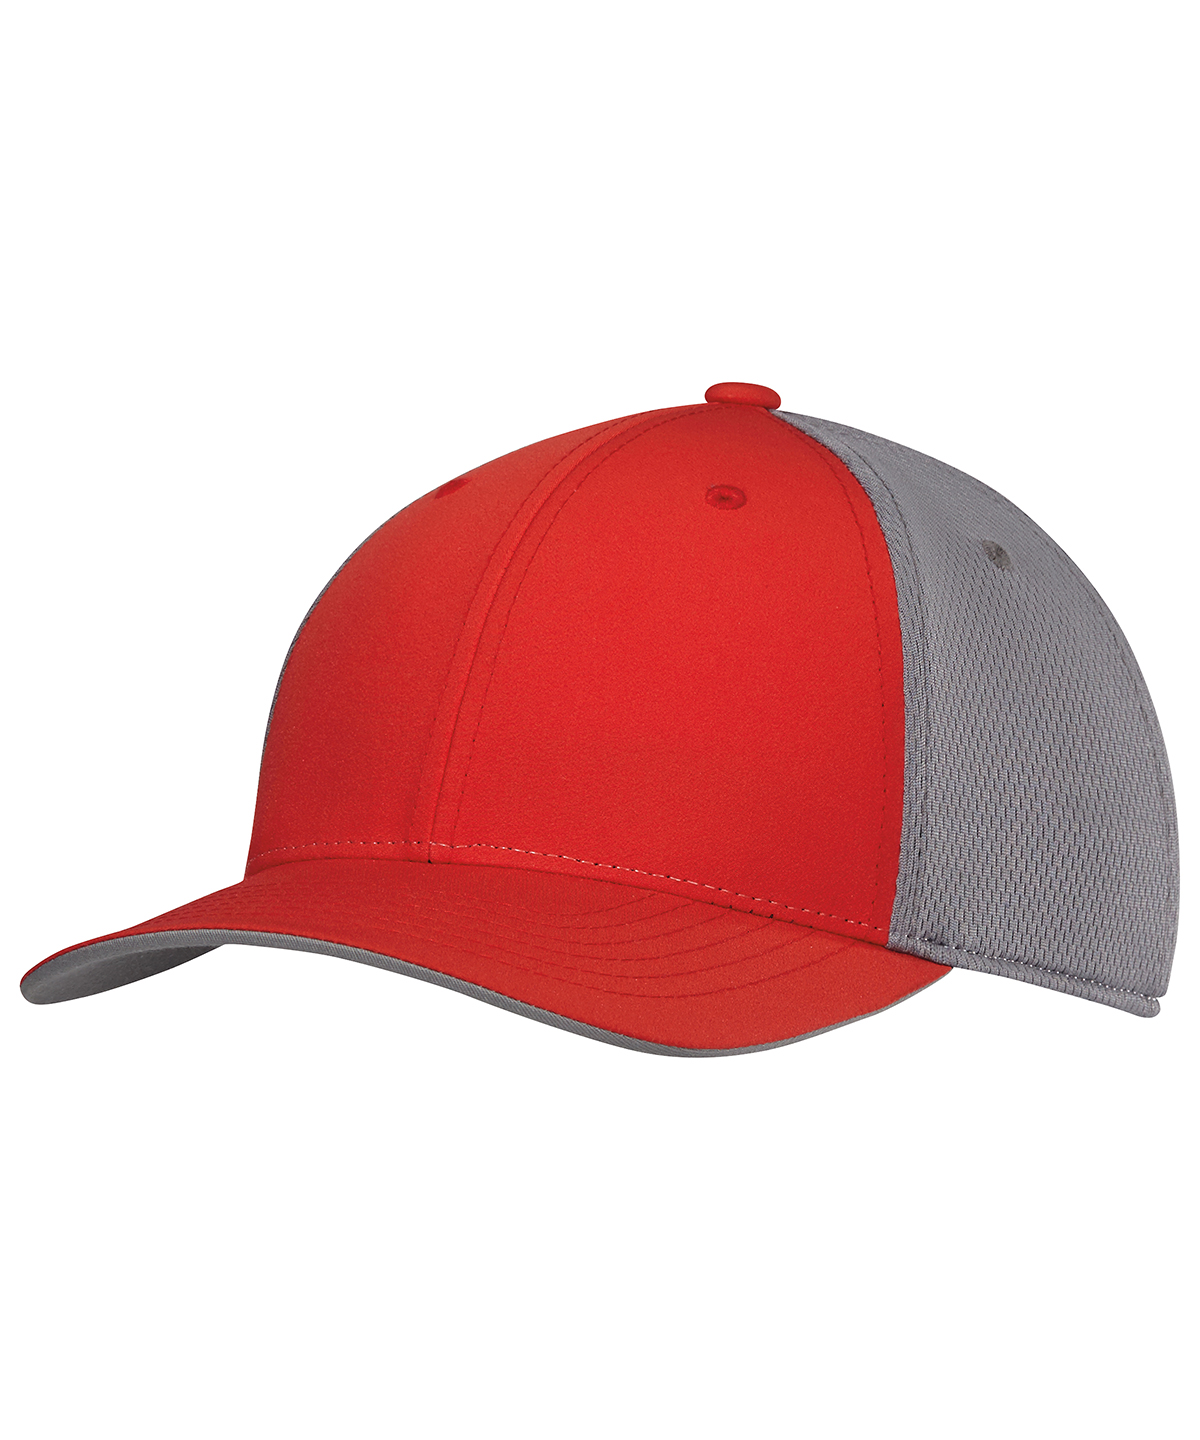 Climacool Tour Crestable Cap High Res Red Size Large/XL